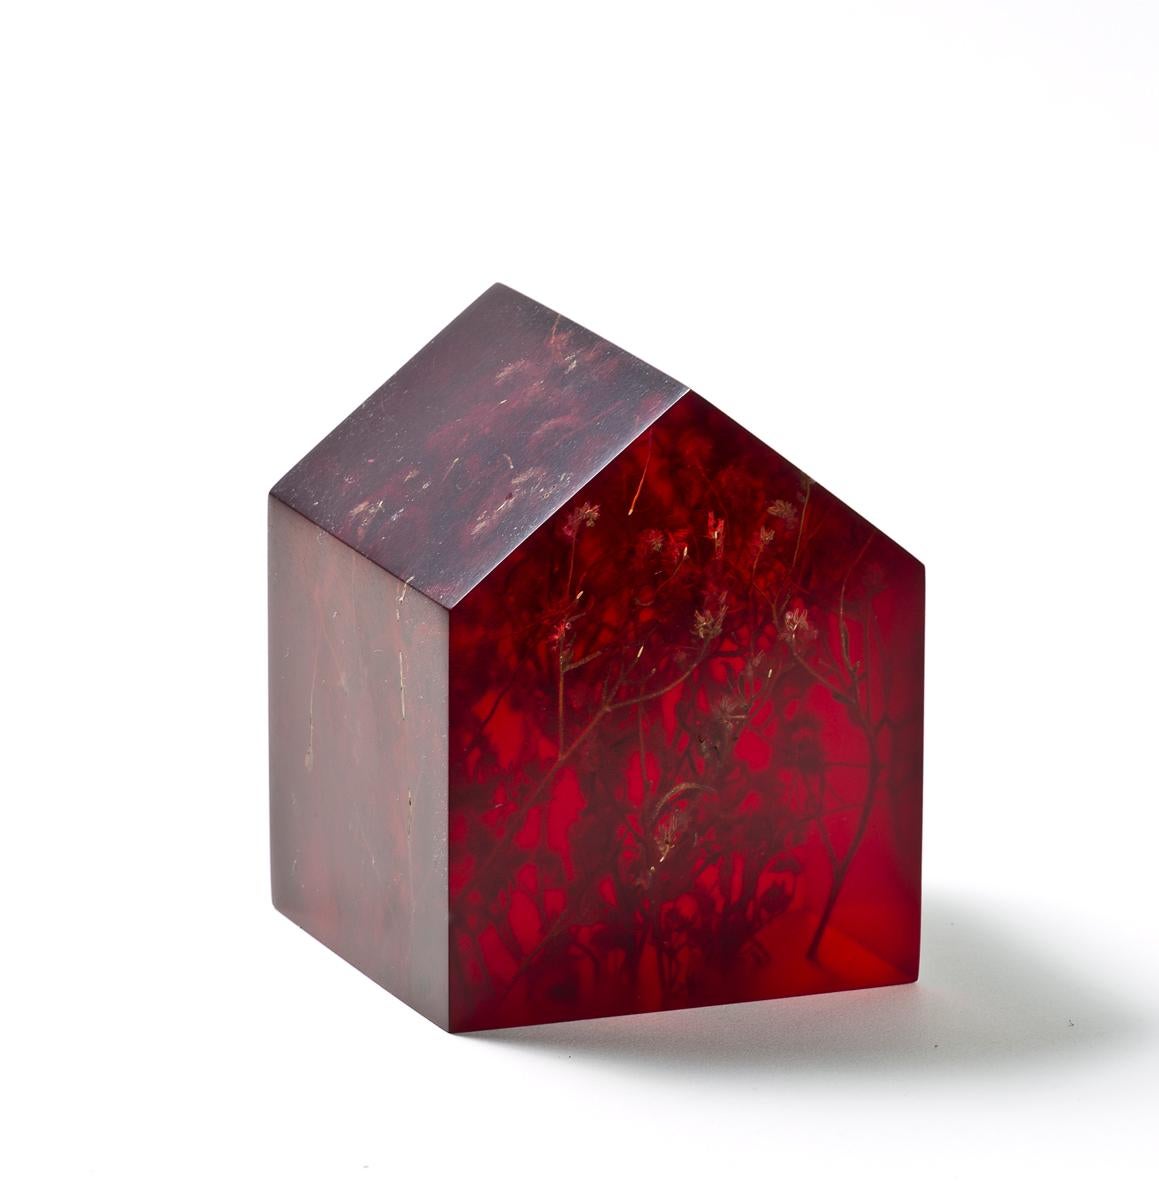 Mayme Kratz Abstract Sculpture - Dwelling with Bush